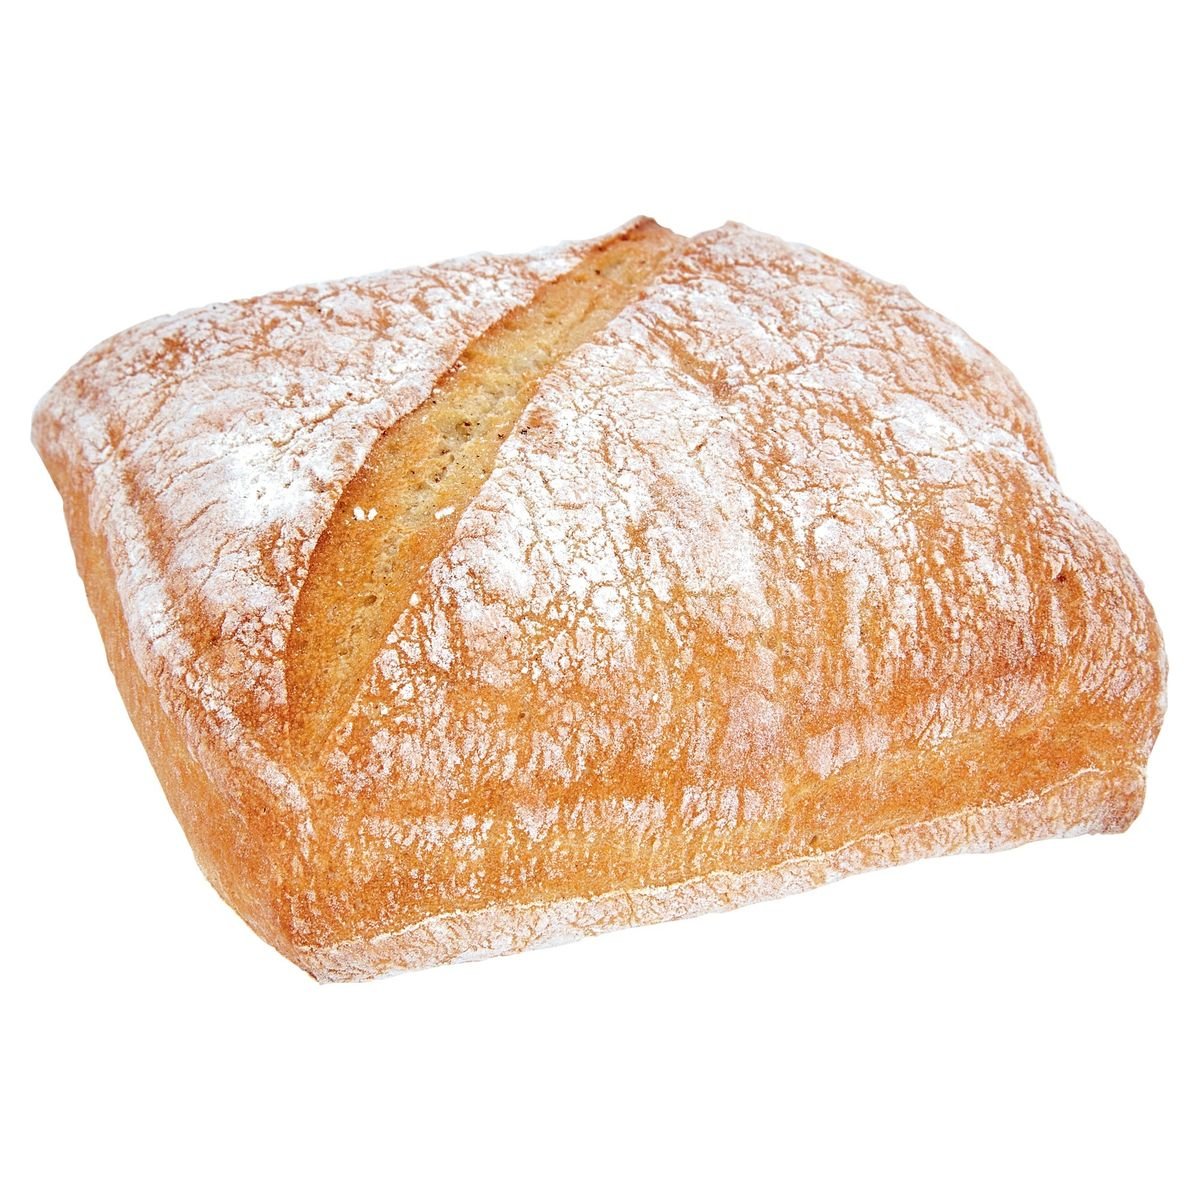 Carrefour Traditioneel Brood FQC